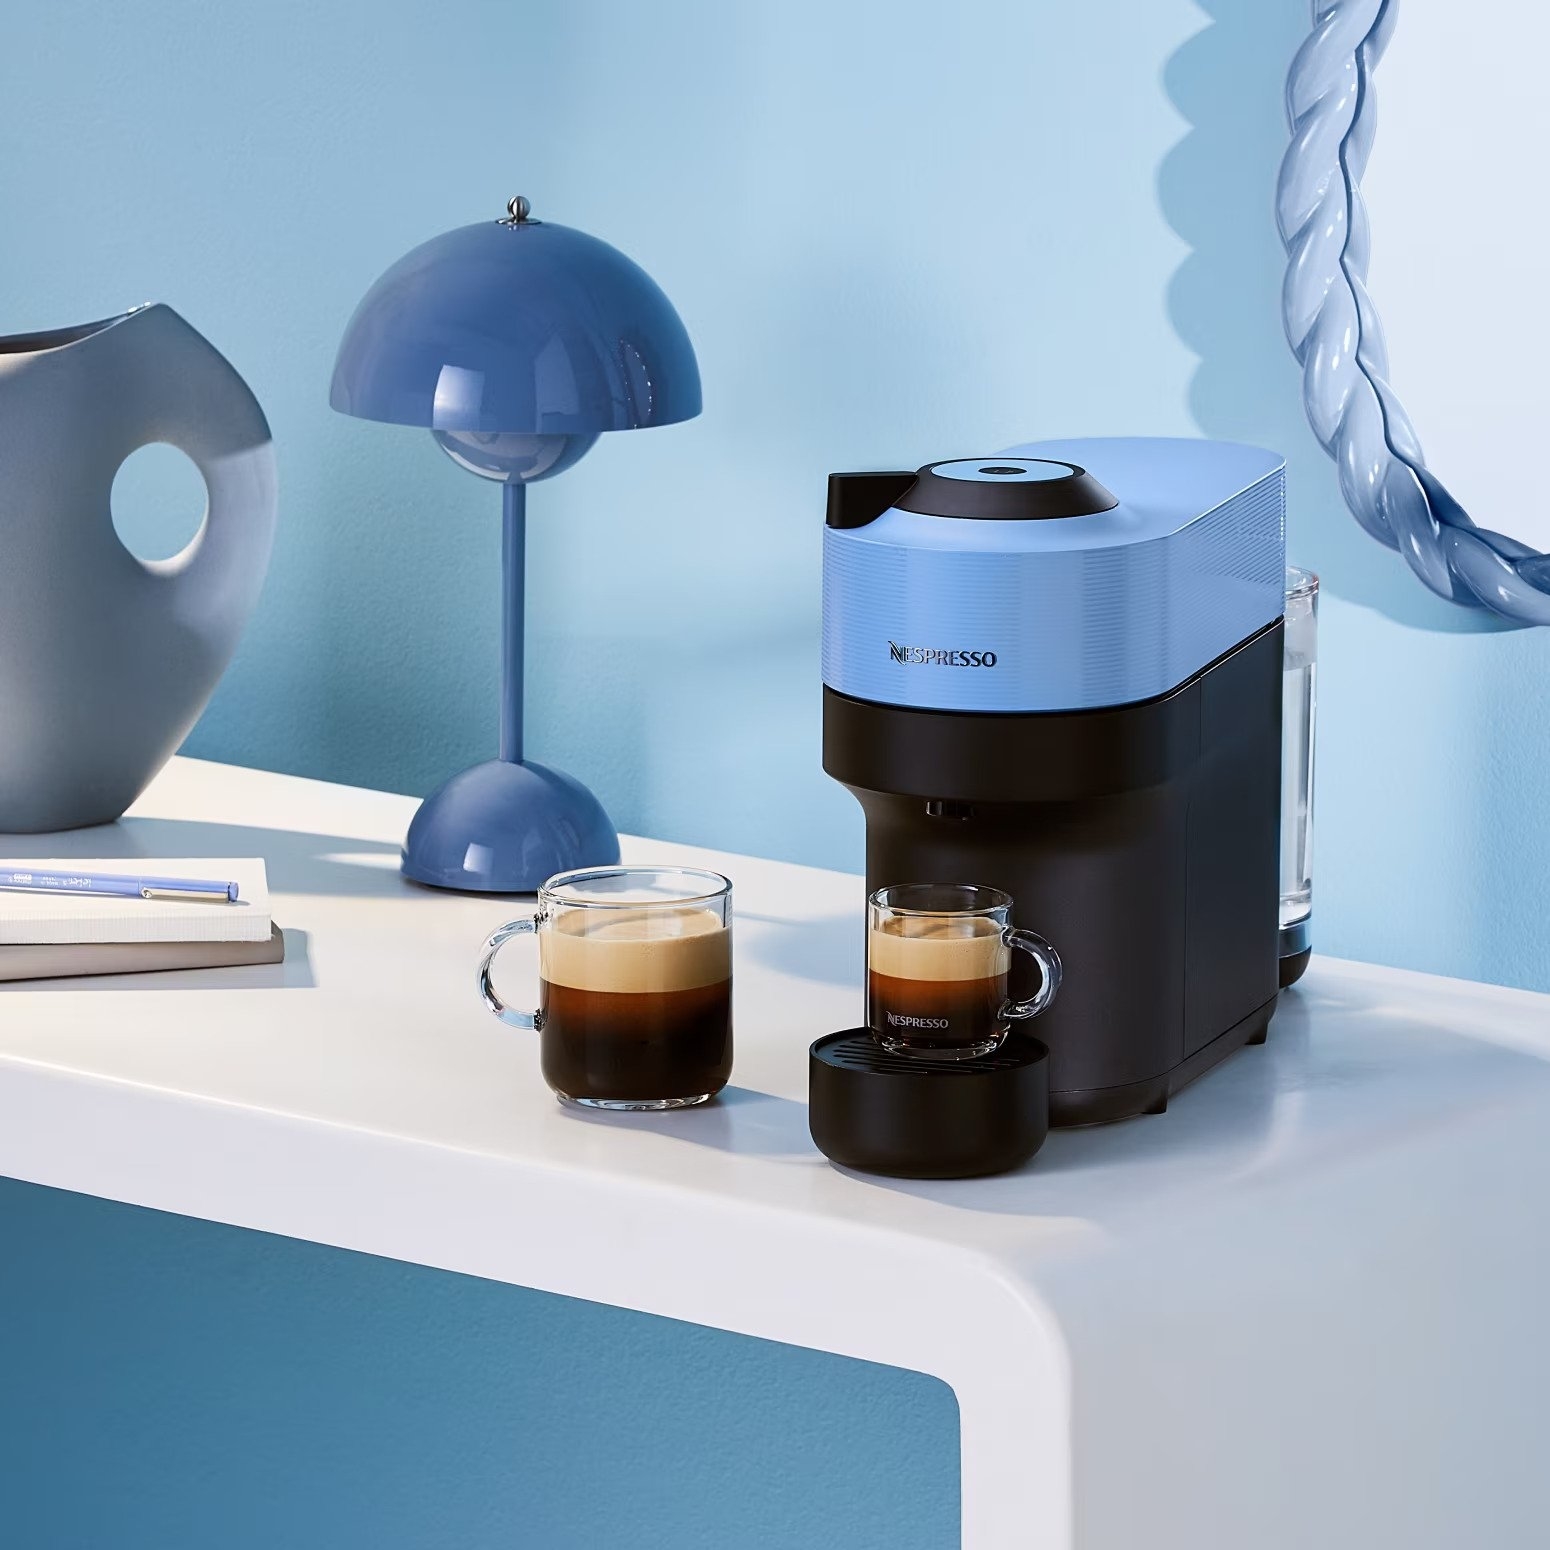 the blue and black Nespresso machine in a light blue color